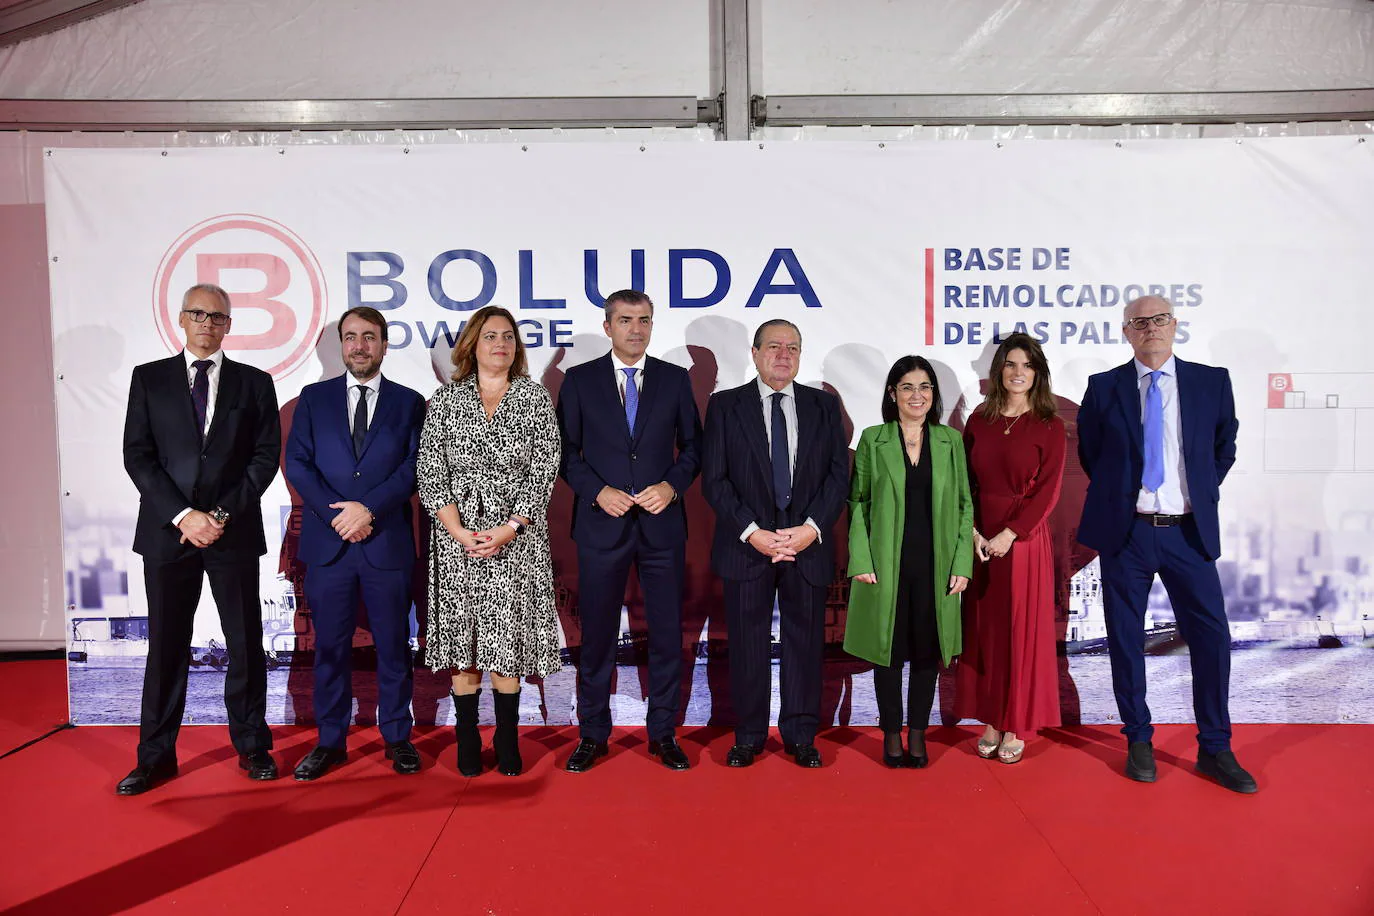 Boluda leads the way to achieve the Canary Islands exemption from the rate for emissions rights